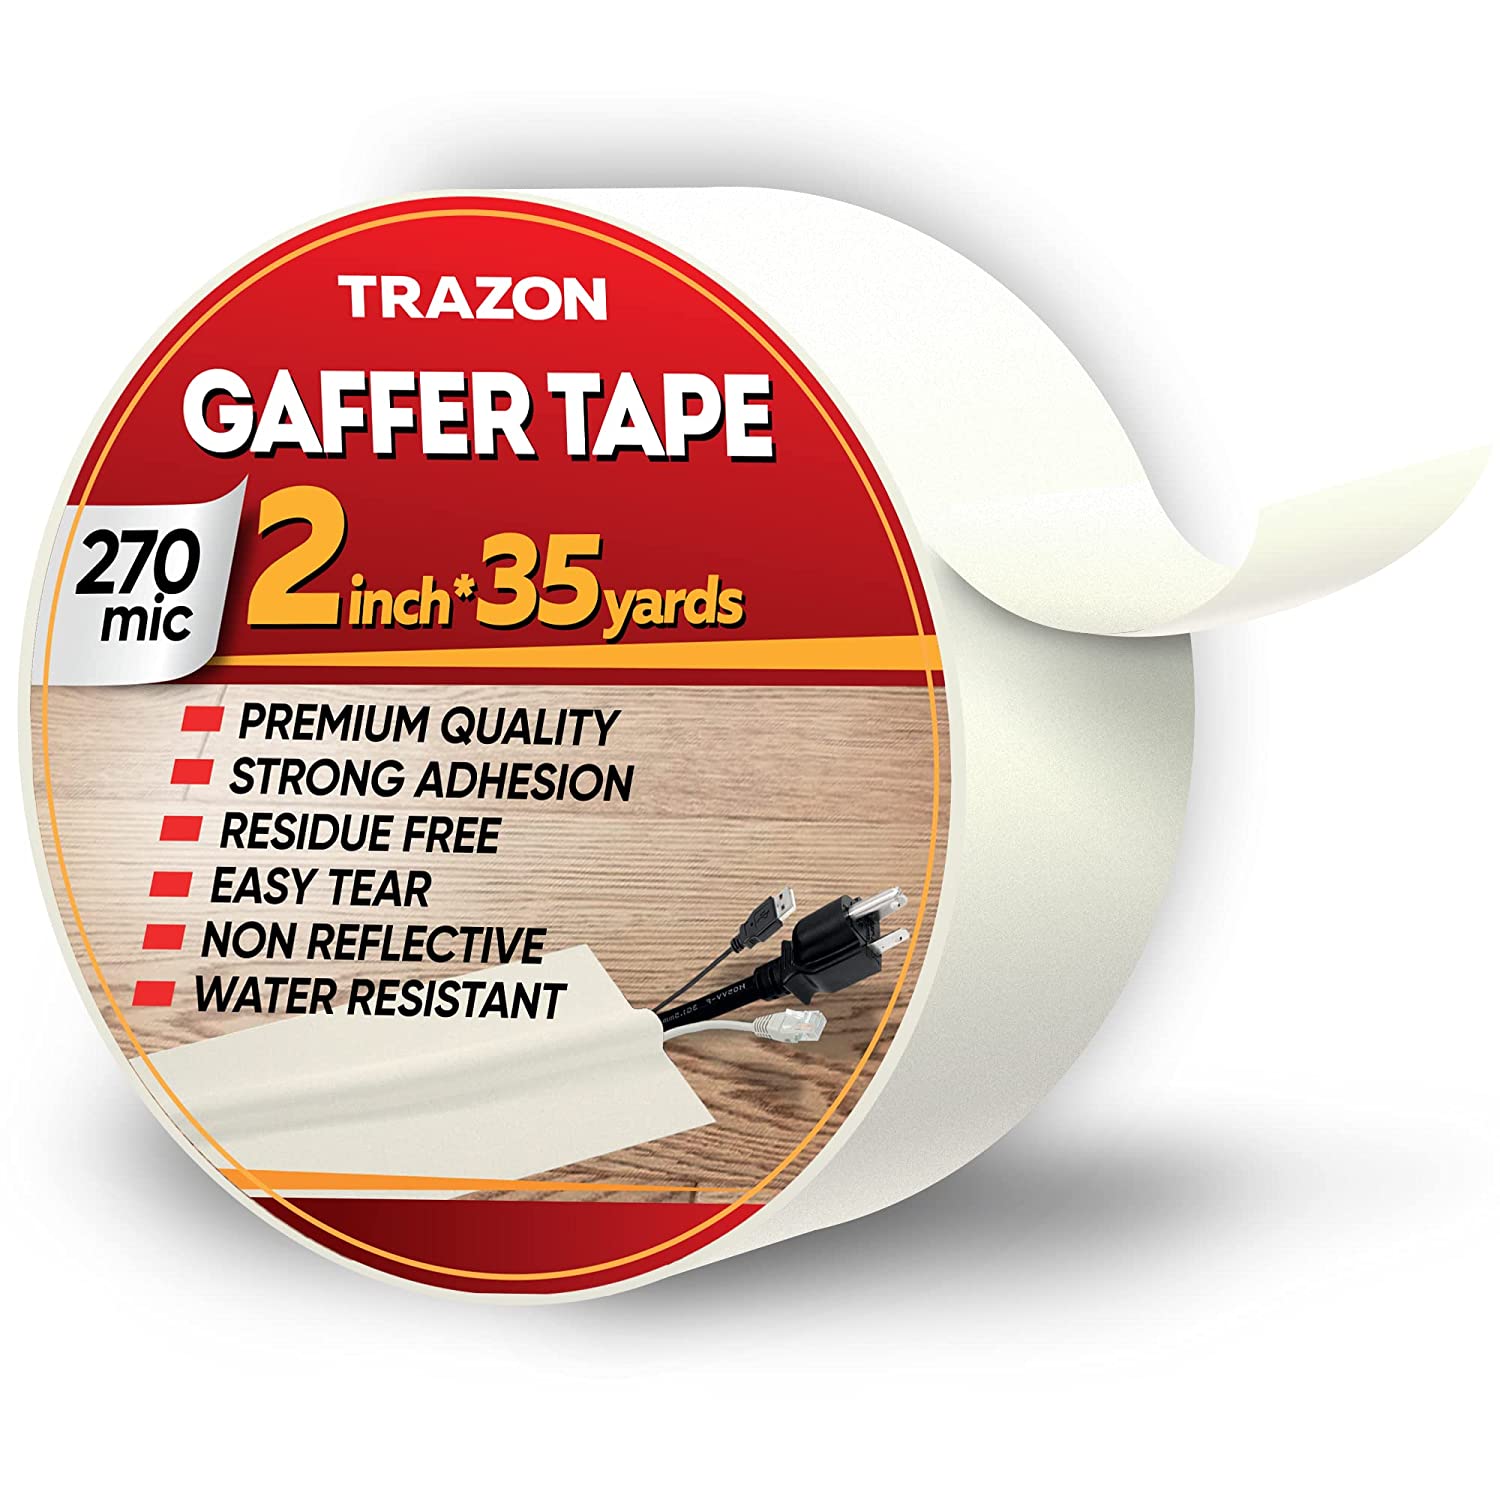 Gaffers Tape, White Cloth Tape, Heavy-duty, Non-reflective, Water  Resistant, Residue-free, Multipurpose Tape 3 Inch X 90 Feet 